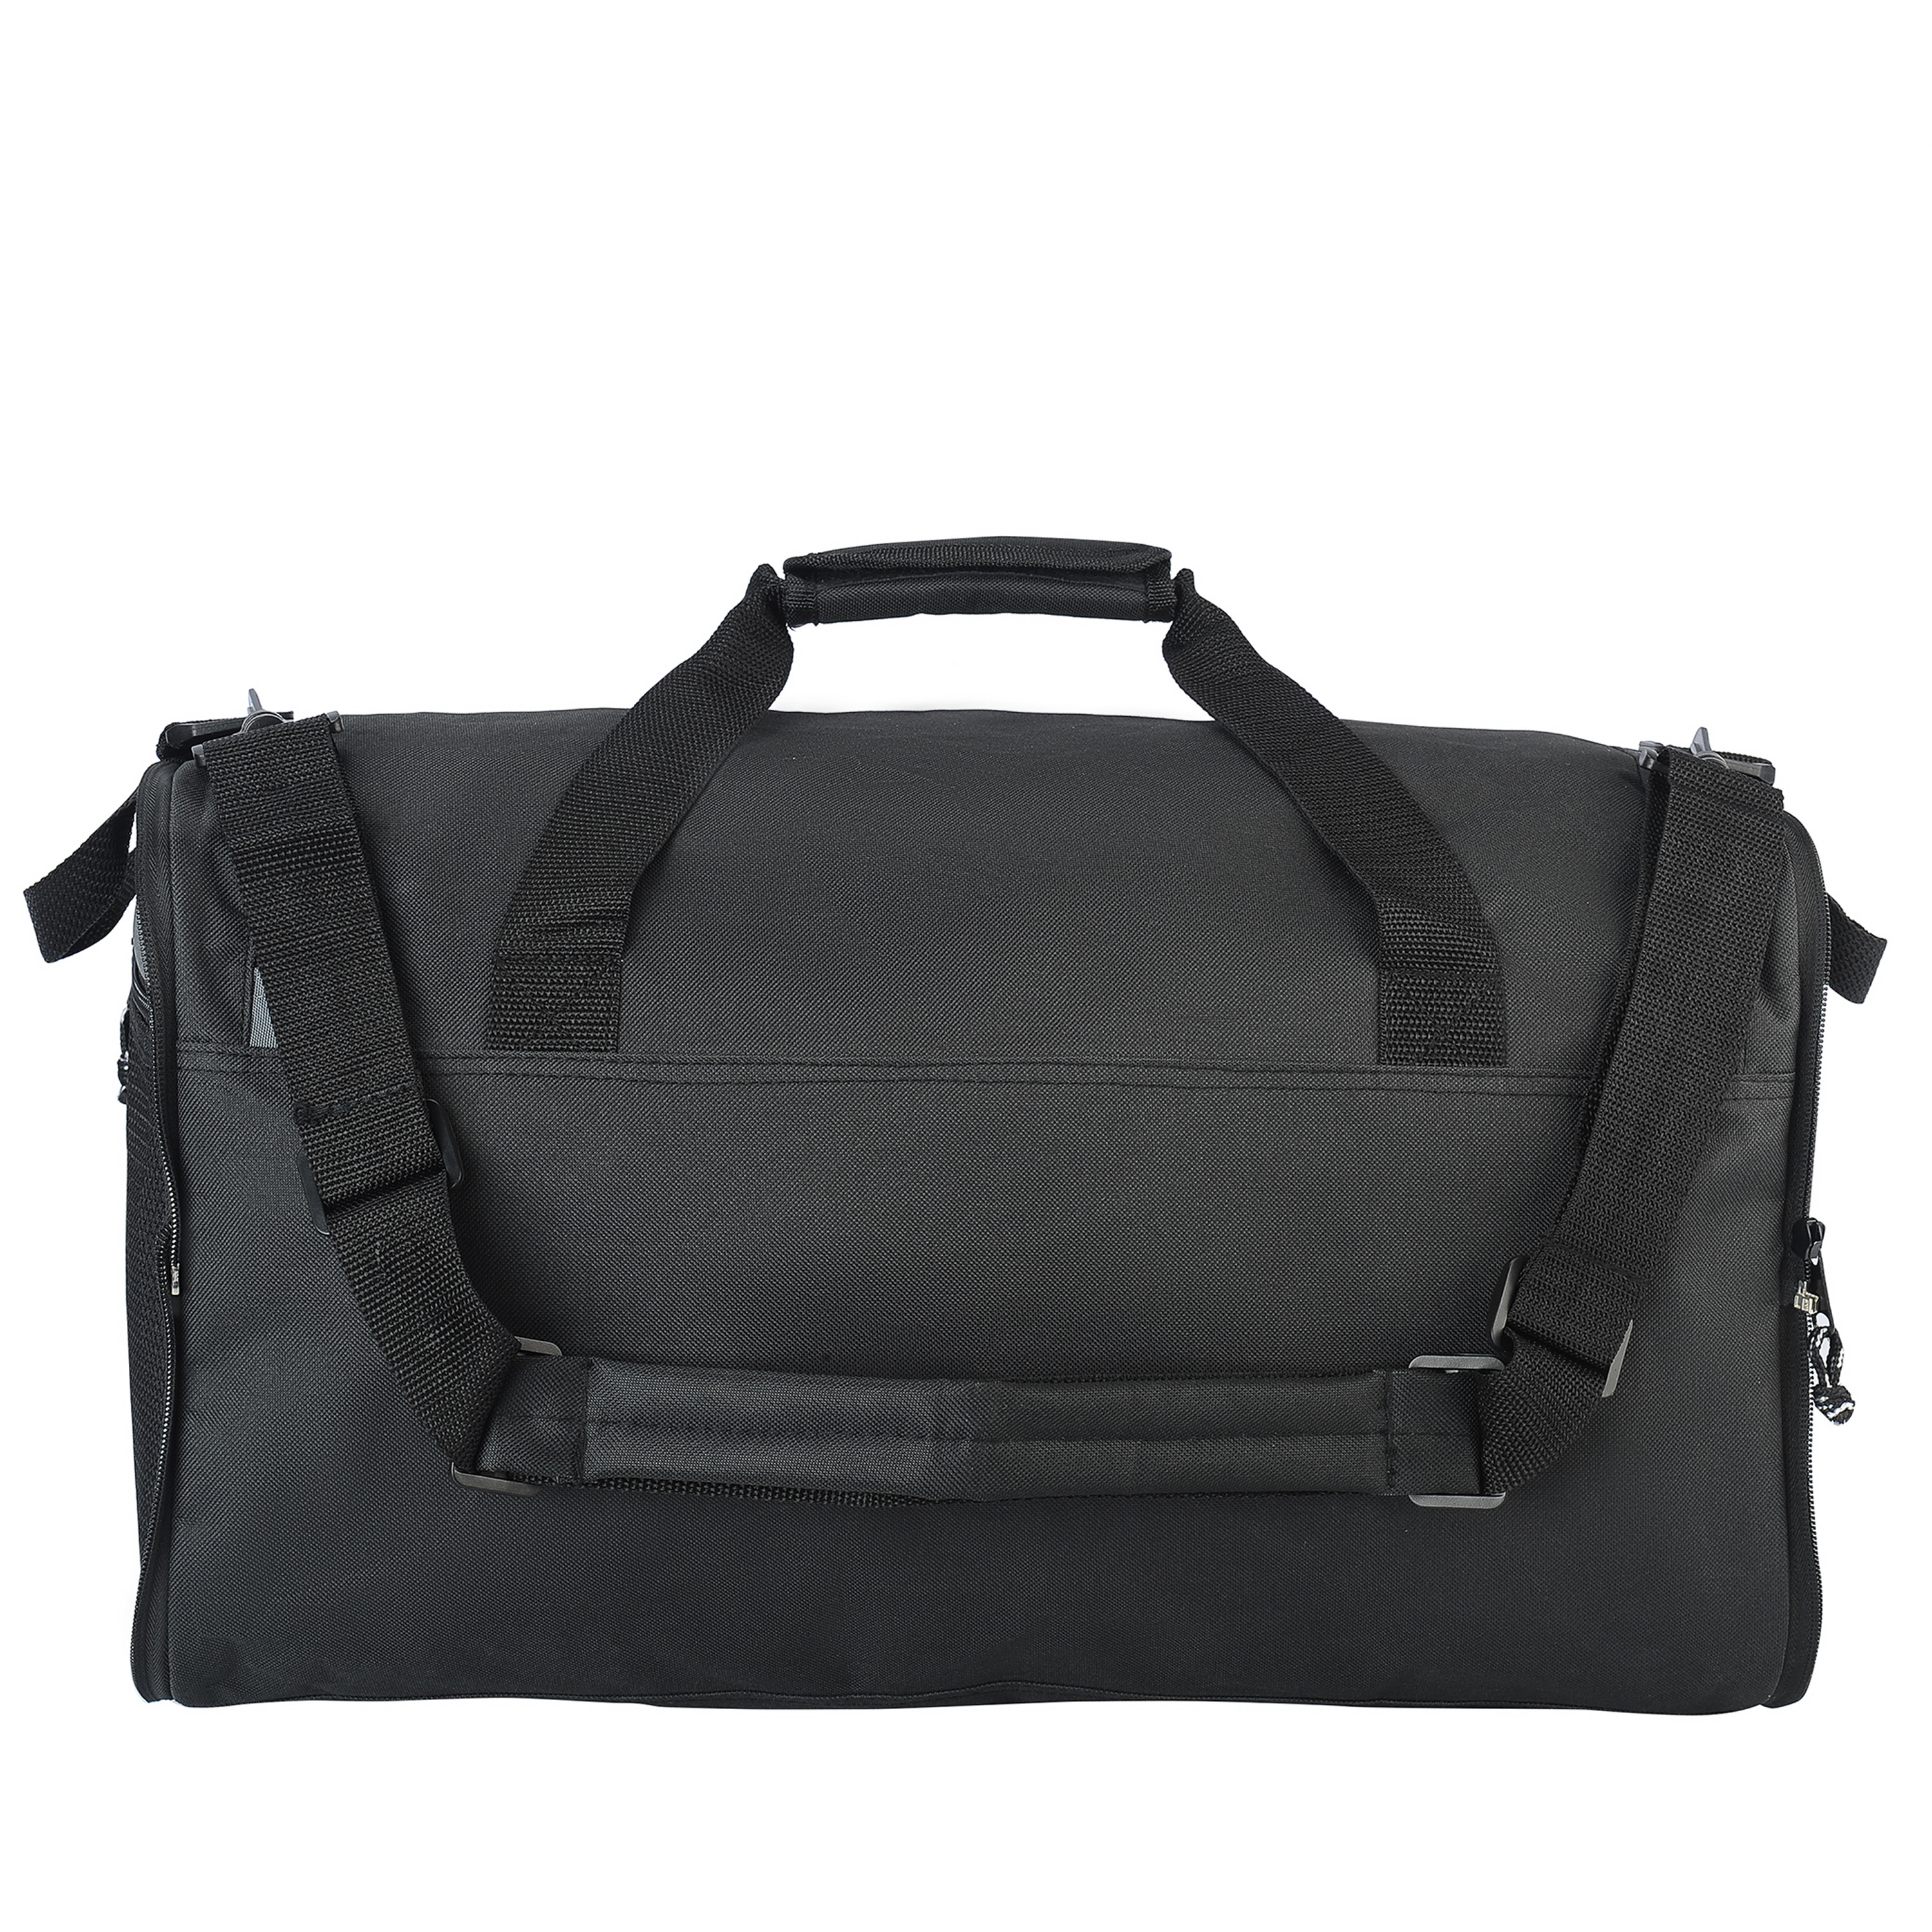 Protégé 20" Collapsible Sport and Travel Duffel Bag, Black - image 5 of 11